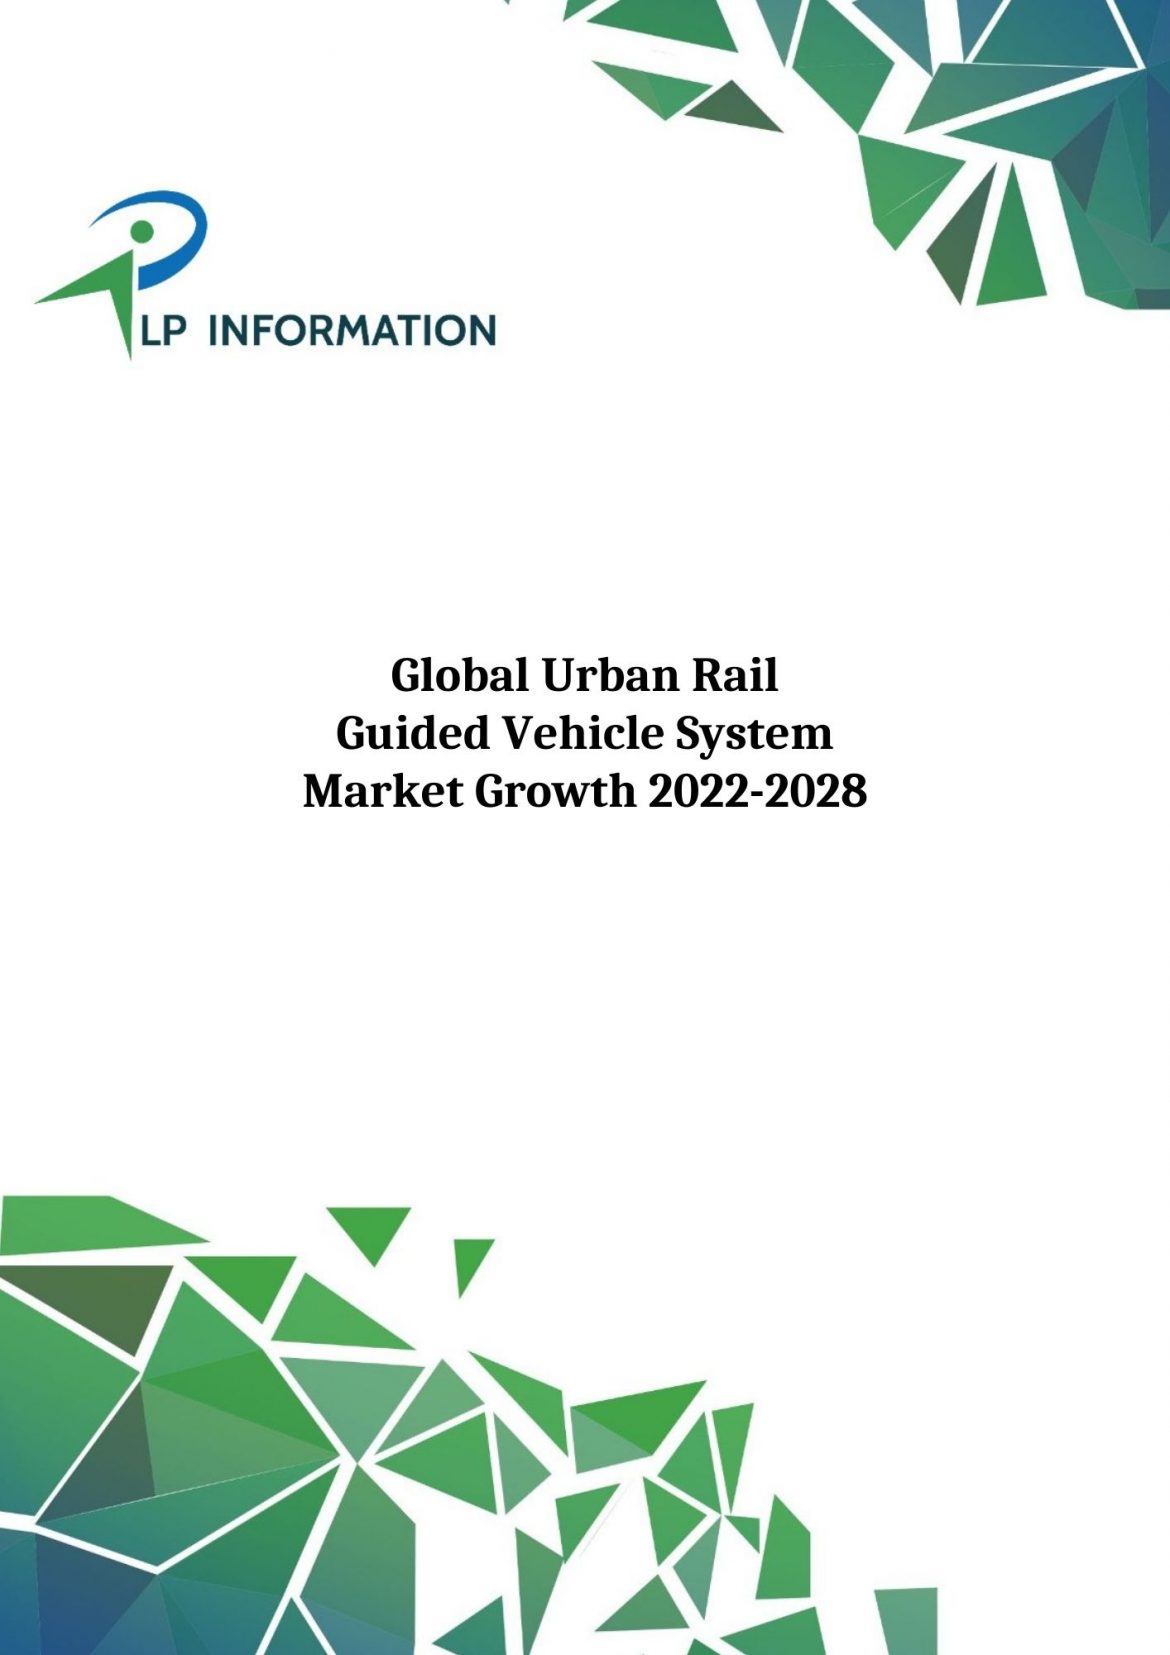 Global Urban Rail Guided Vehicle System Market Growth 2022-2028